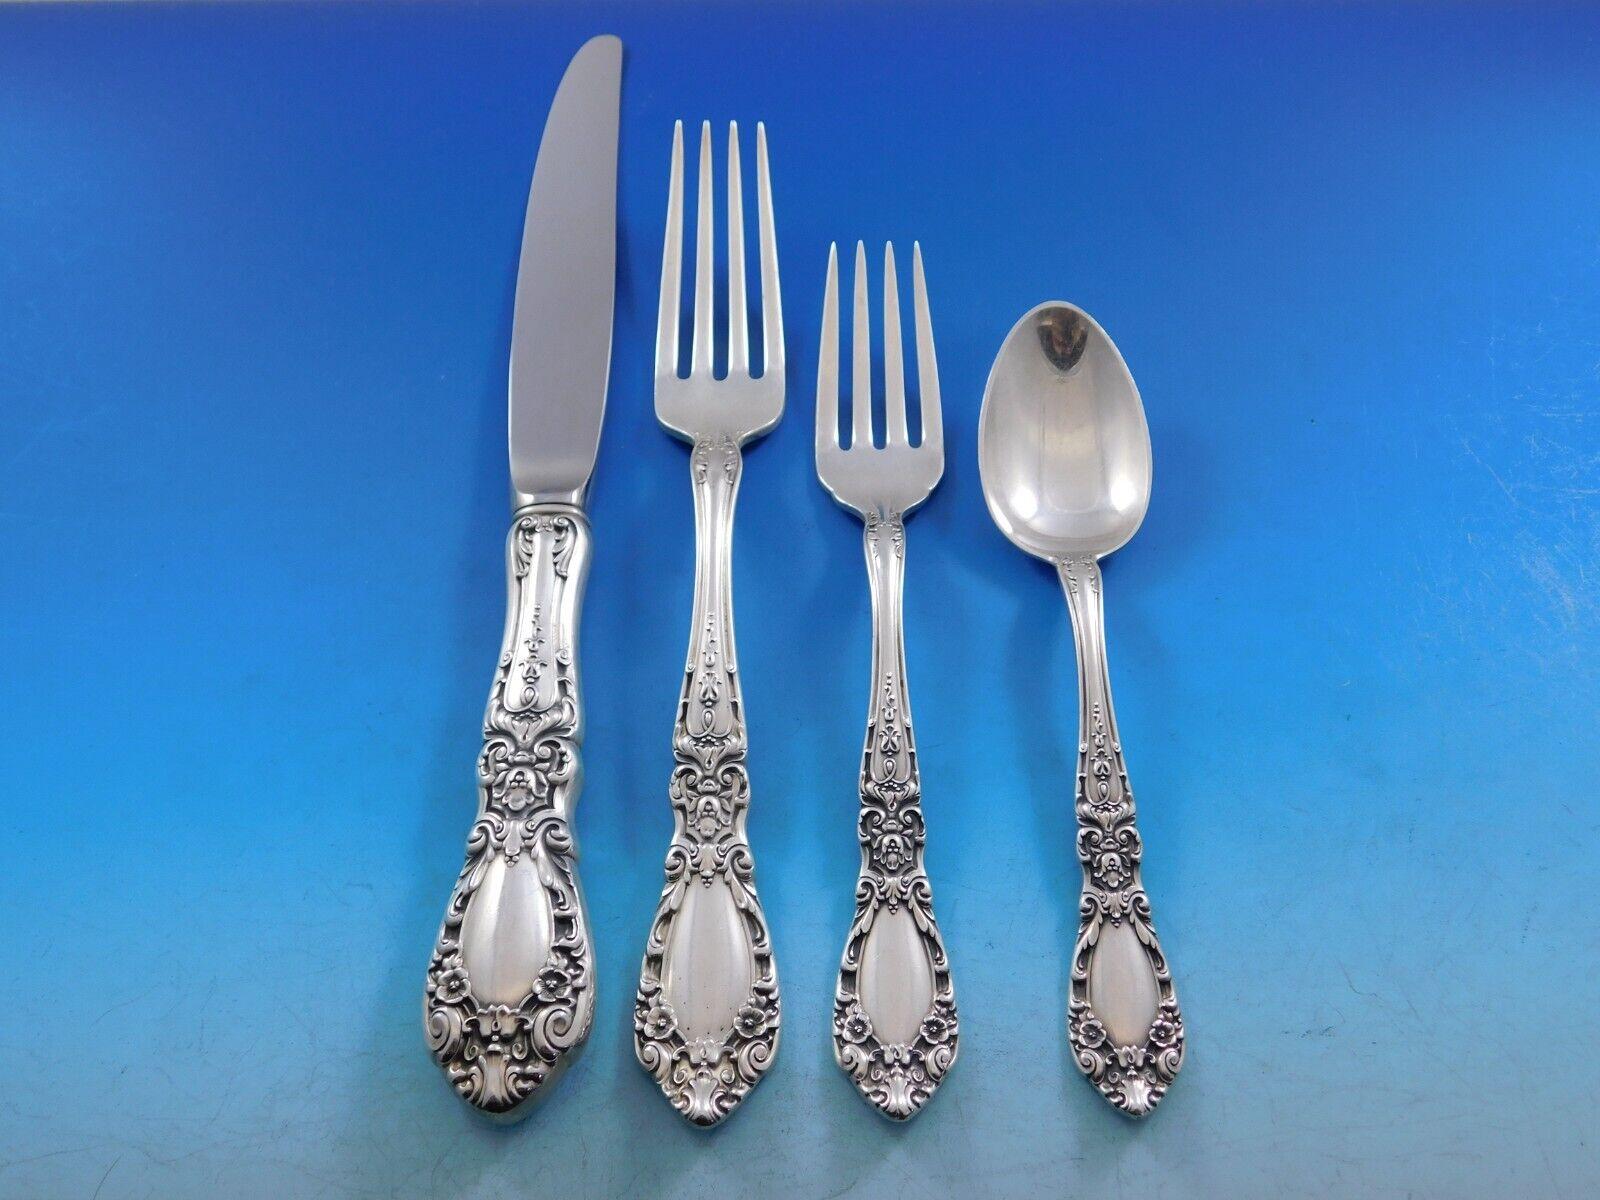 Prince Eugene by Alvin Sterling Silver Flatware Set for 12 Service 80 Pcs Dinner In Excellent Condition For Sale In Big Bend, WI